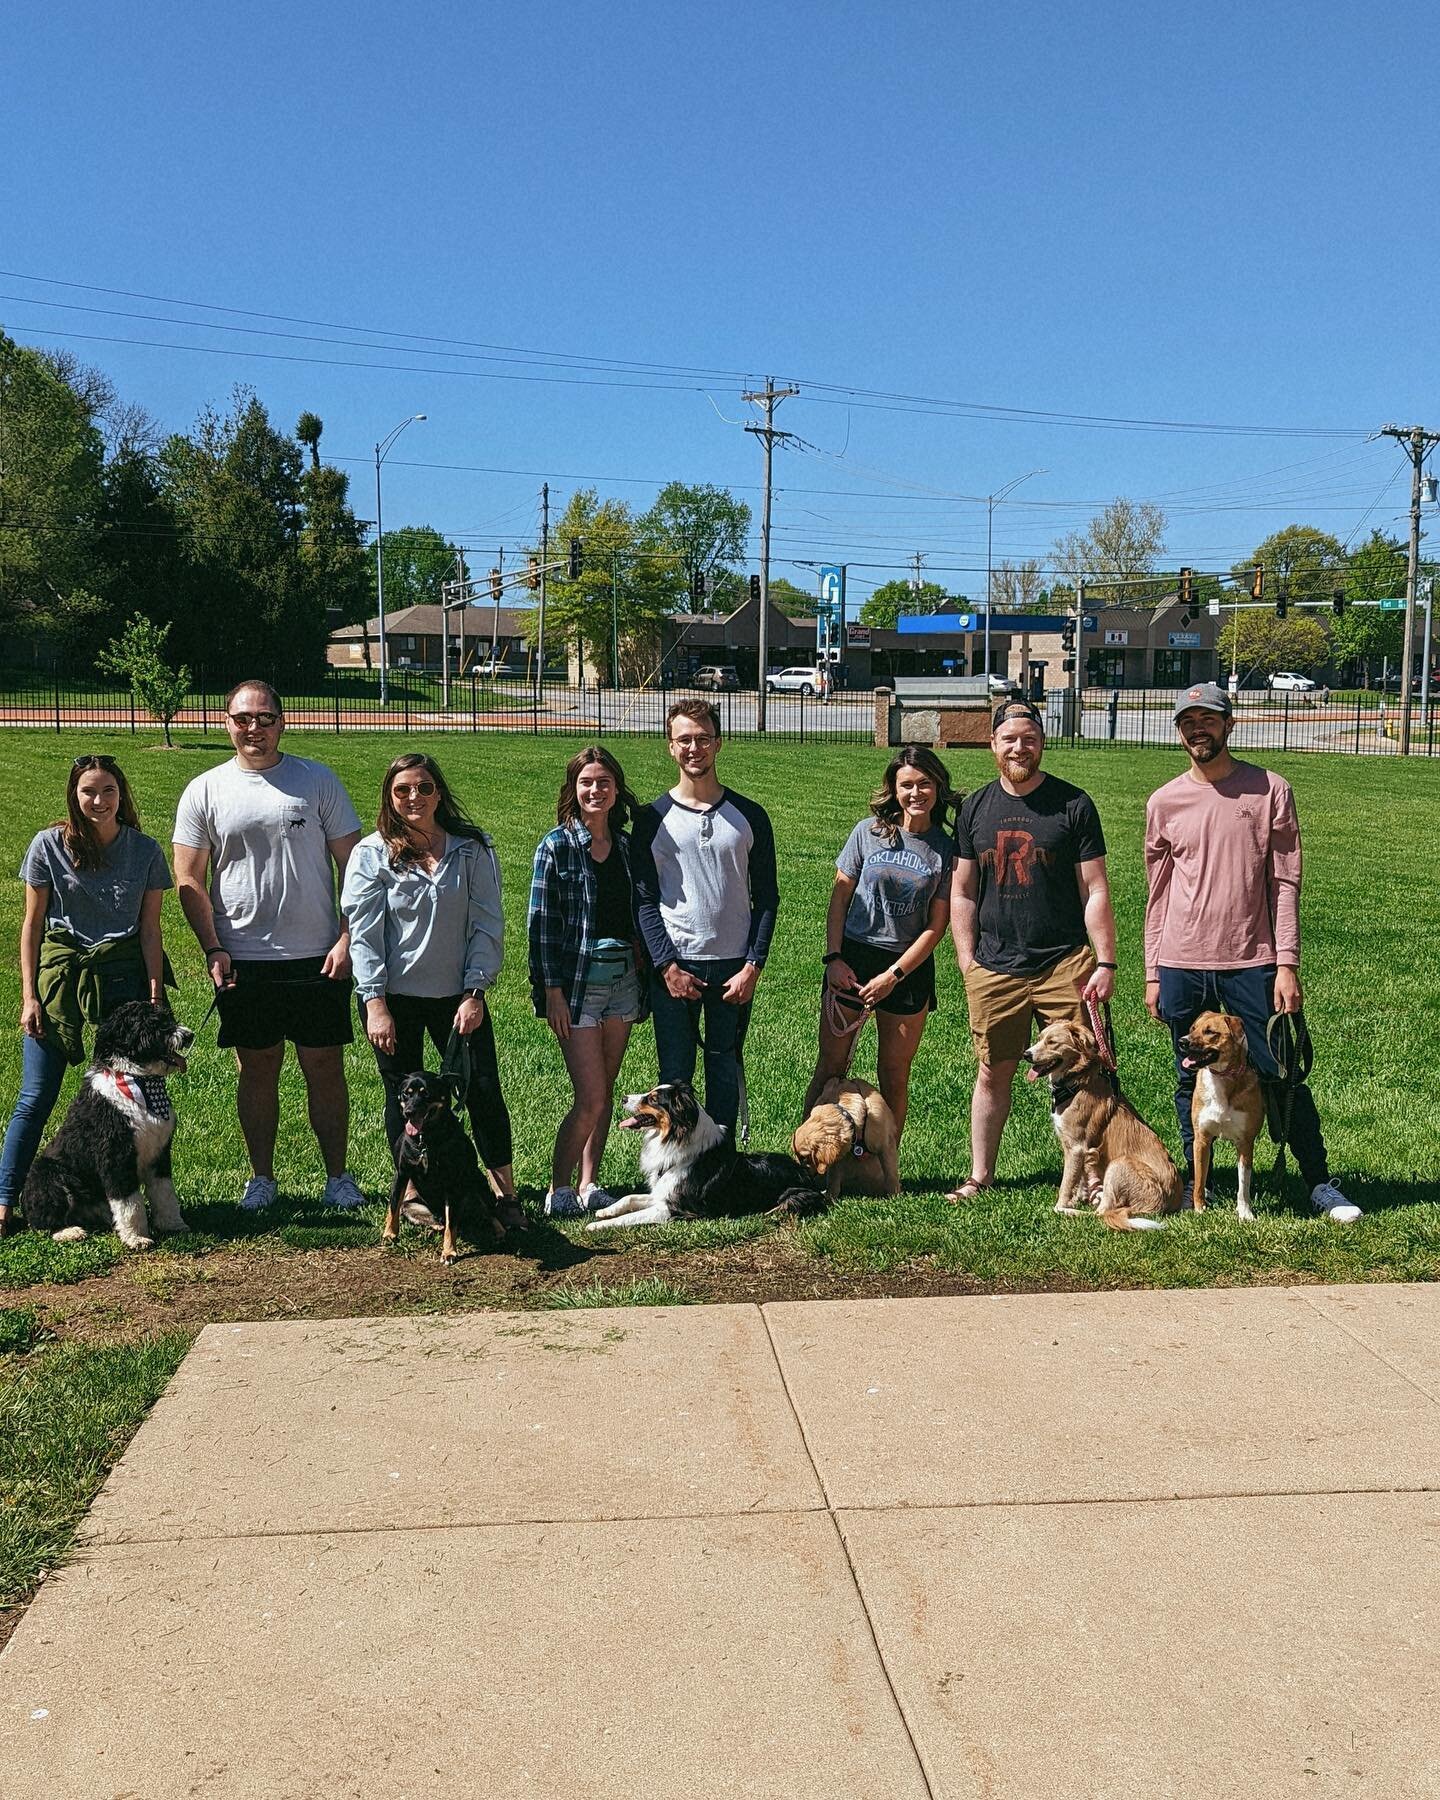 Reminiscing on all the fun had during the Doggie Play Date at @greatcircleorg 🐶🤗 We&rsquo;re thankful for those who participated, and Great Circle for having us out! Kiddos and doggos are the best combination.